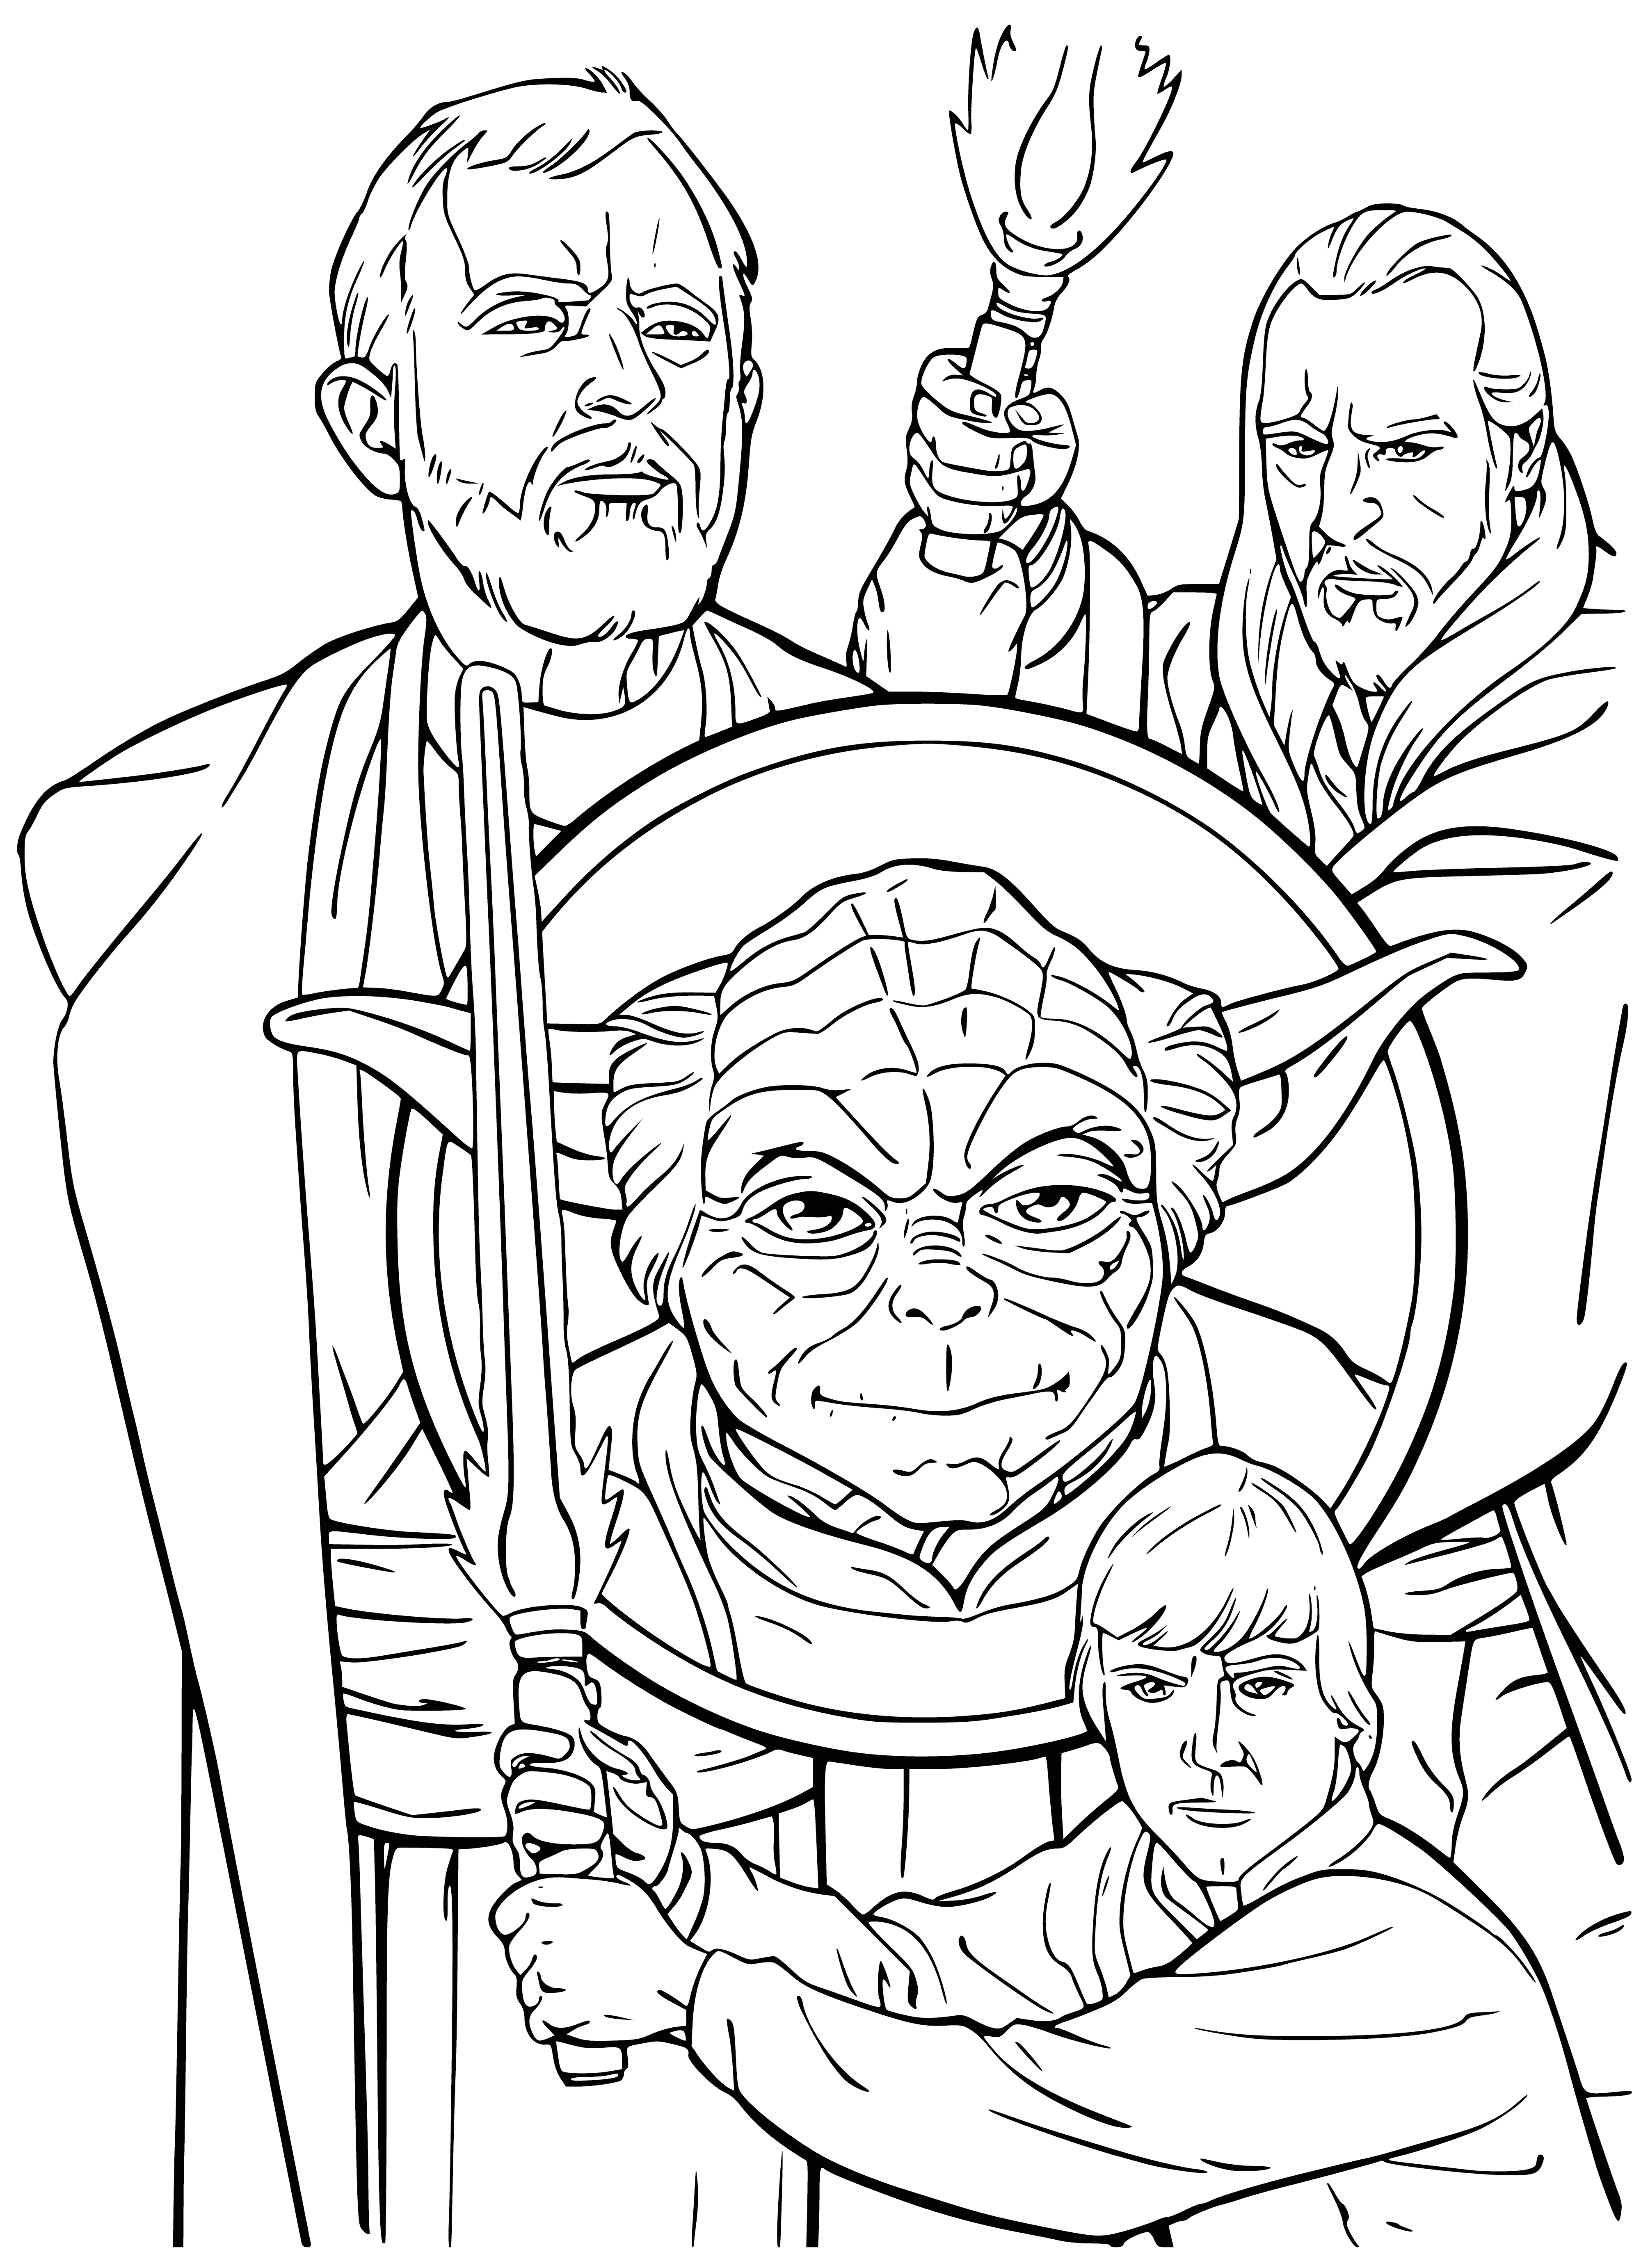 coloring page: The Jedi return and Luke, trained by Obi-Wan & Yoda in the Force, challenges Vader in a duel, fulfilling the prophecy and saving the Galaxy. #StarWars